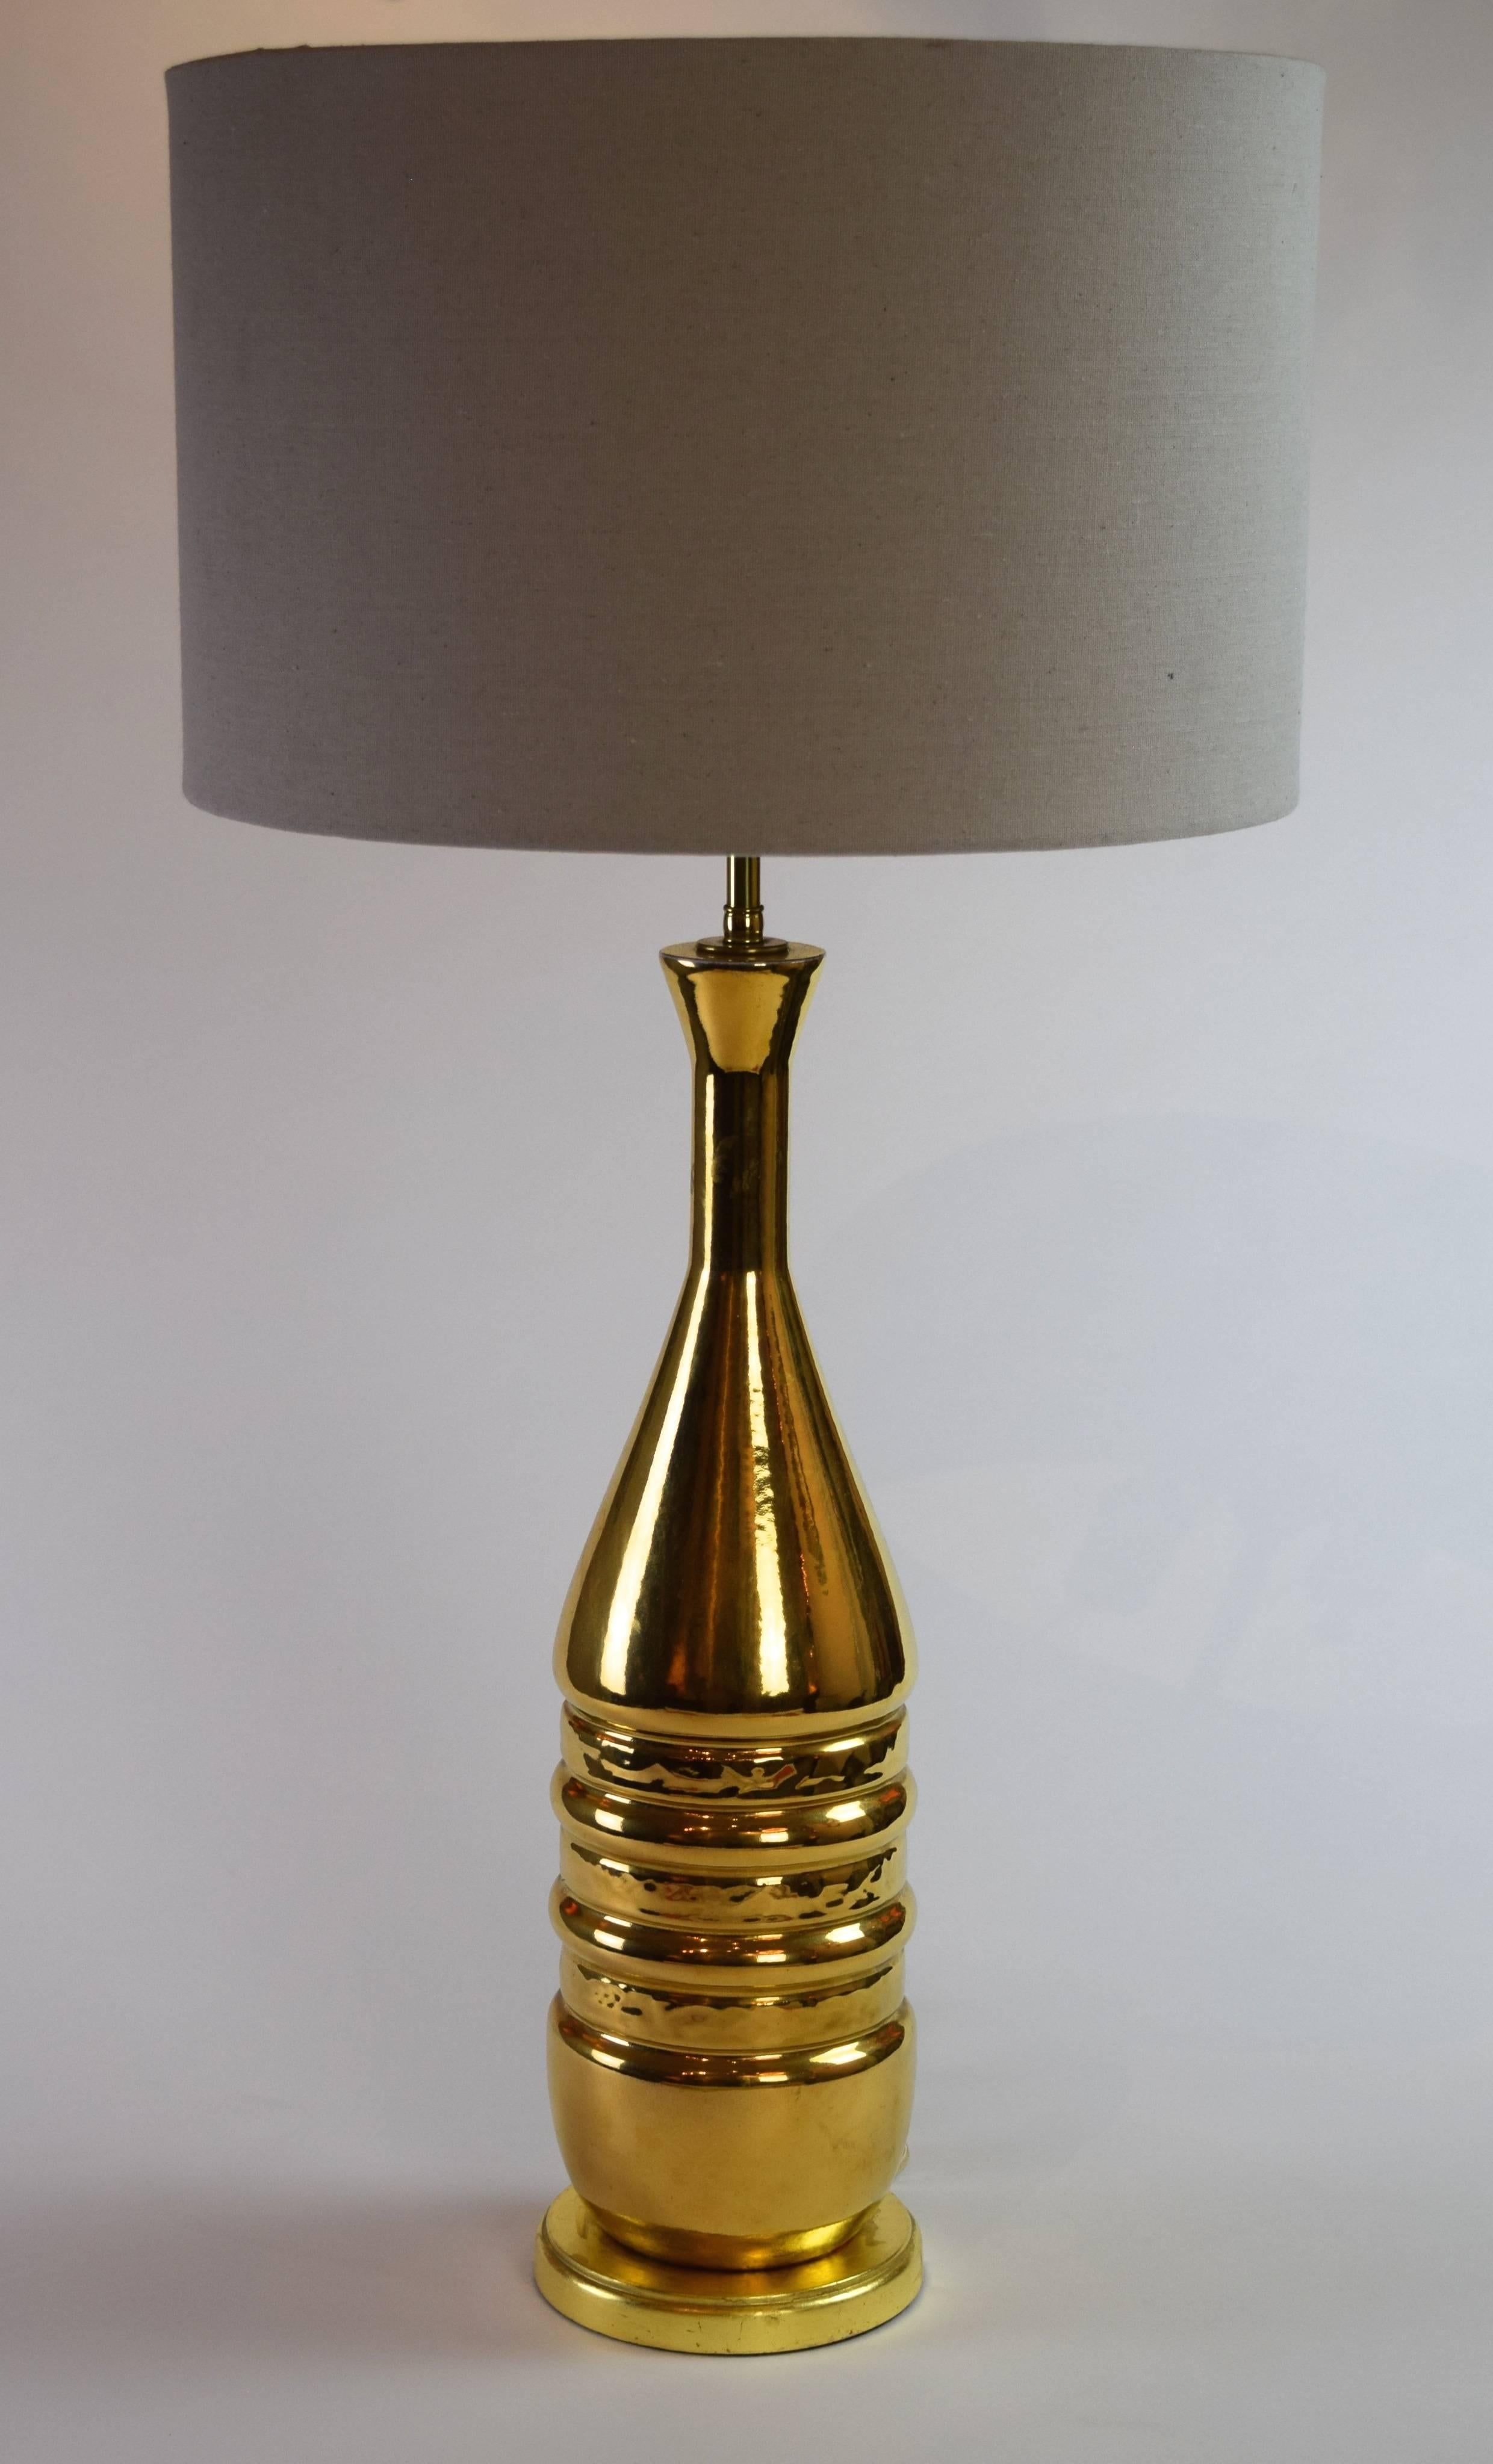 Pair of Tall Mid-Century Modern Gilt Ceramic Lamps For Sale 1